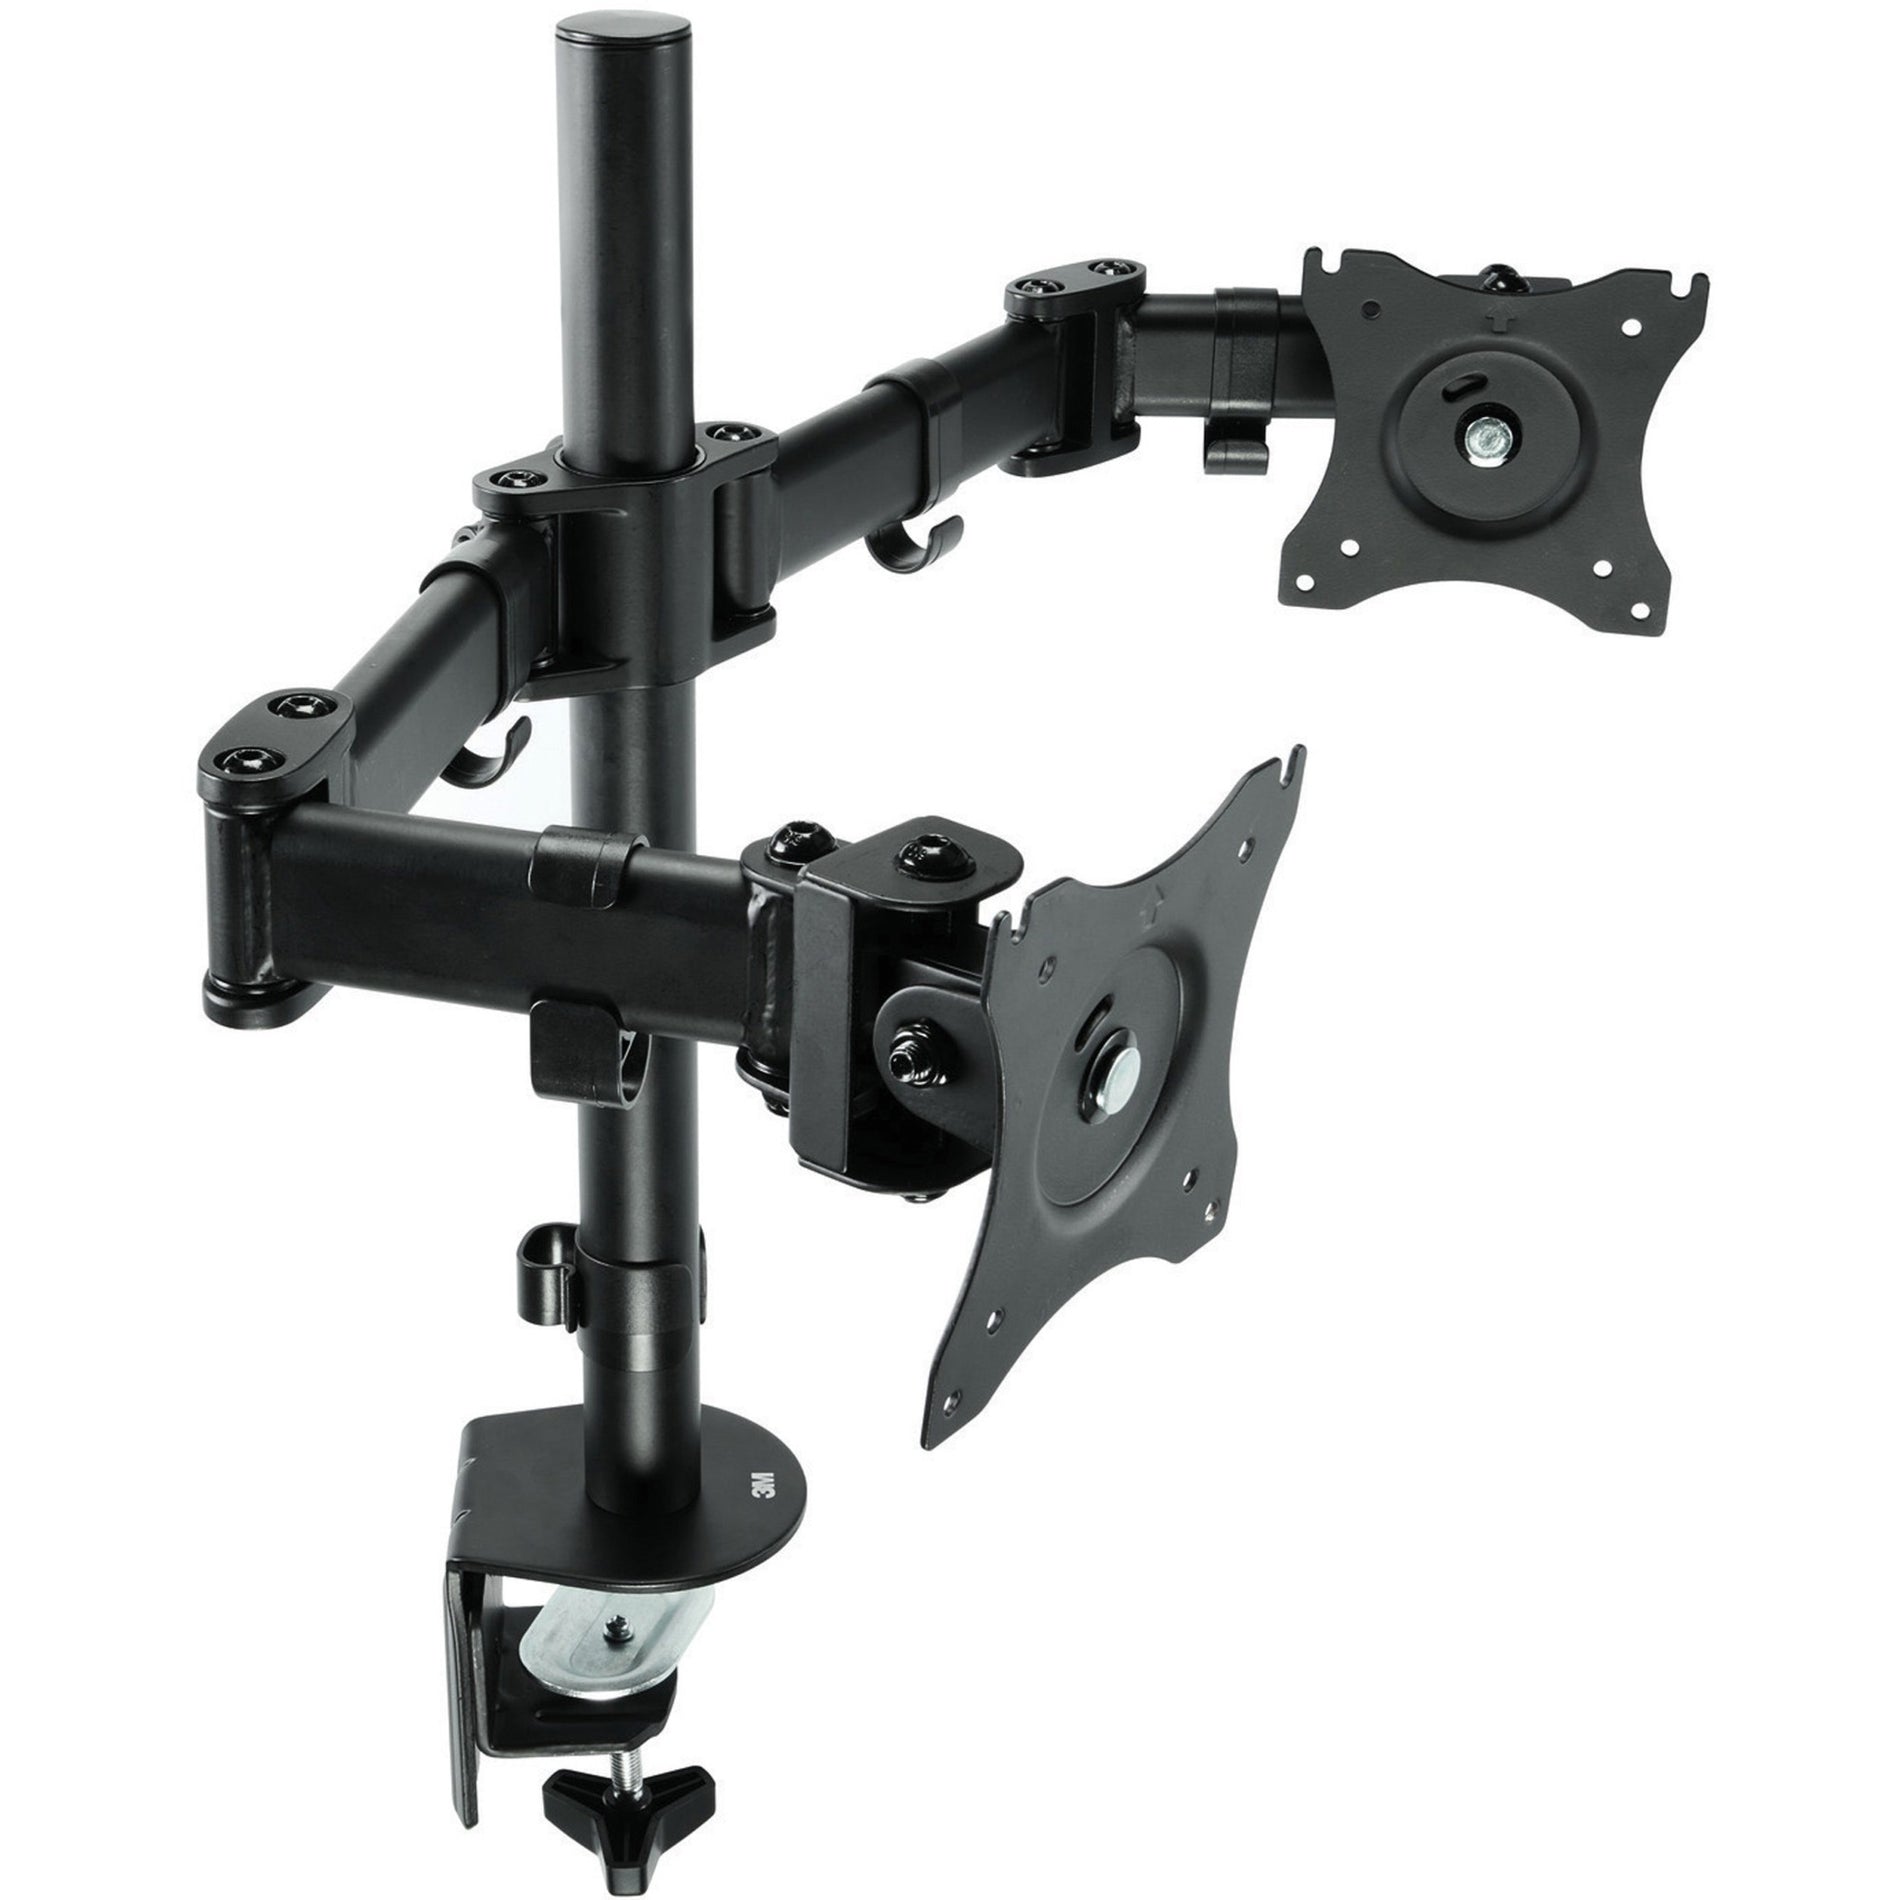 3M MM200B Dual Monitor Mount, Clamp Mount for Monitor - Black, Height Adjustable, 40 lb Maximum Load Capacity, Supports 2 Displays, Maximum Screen Size Supported 28.5"